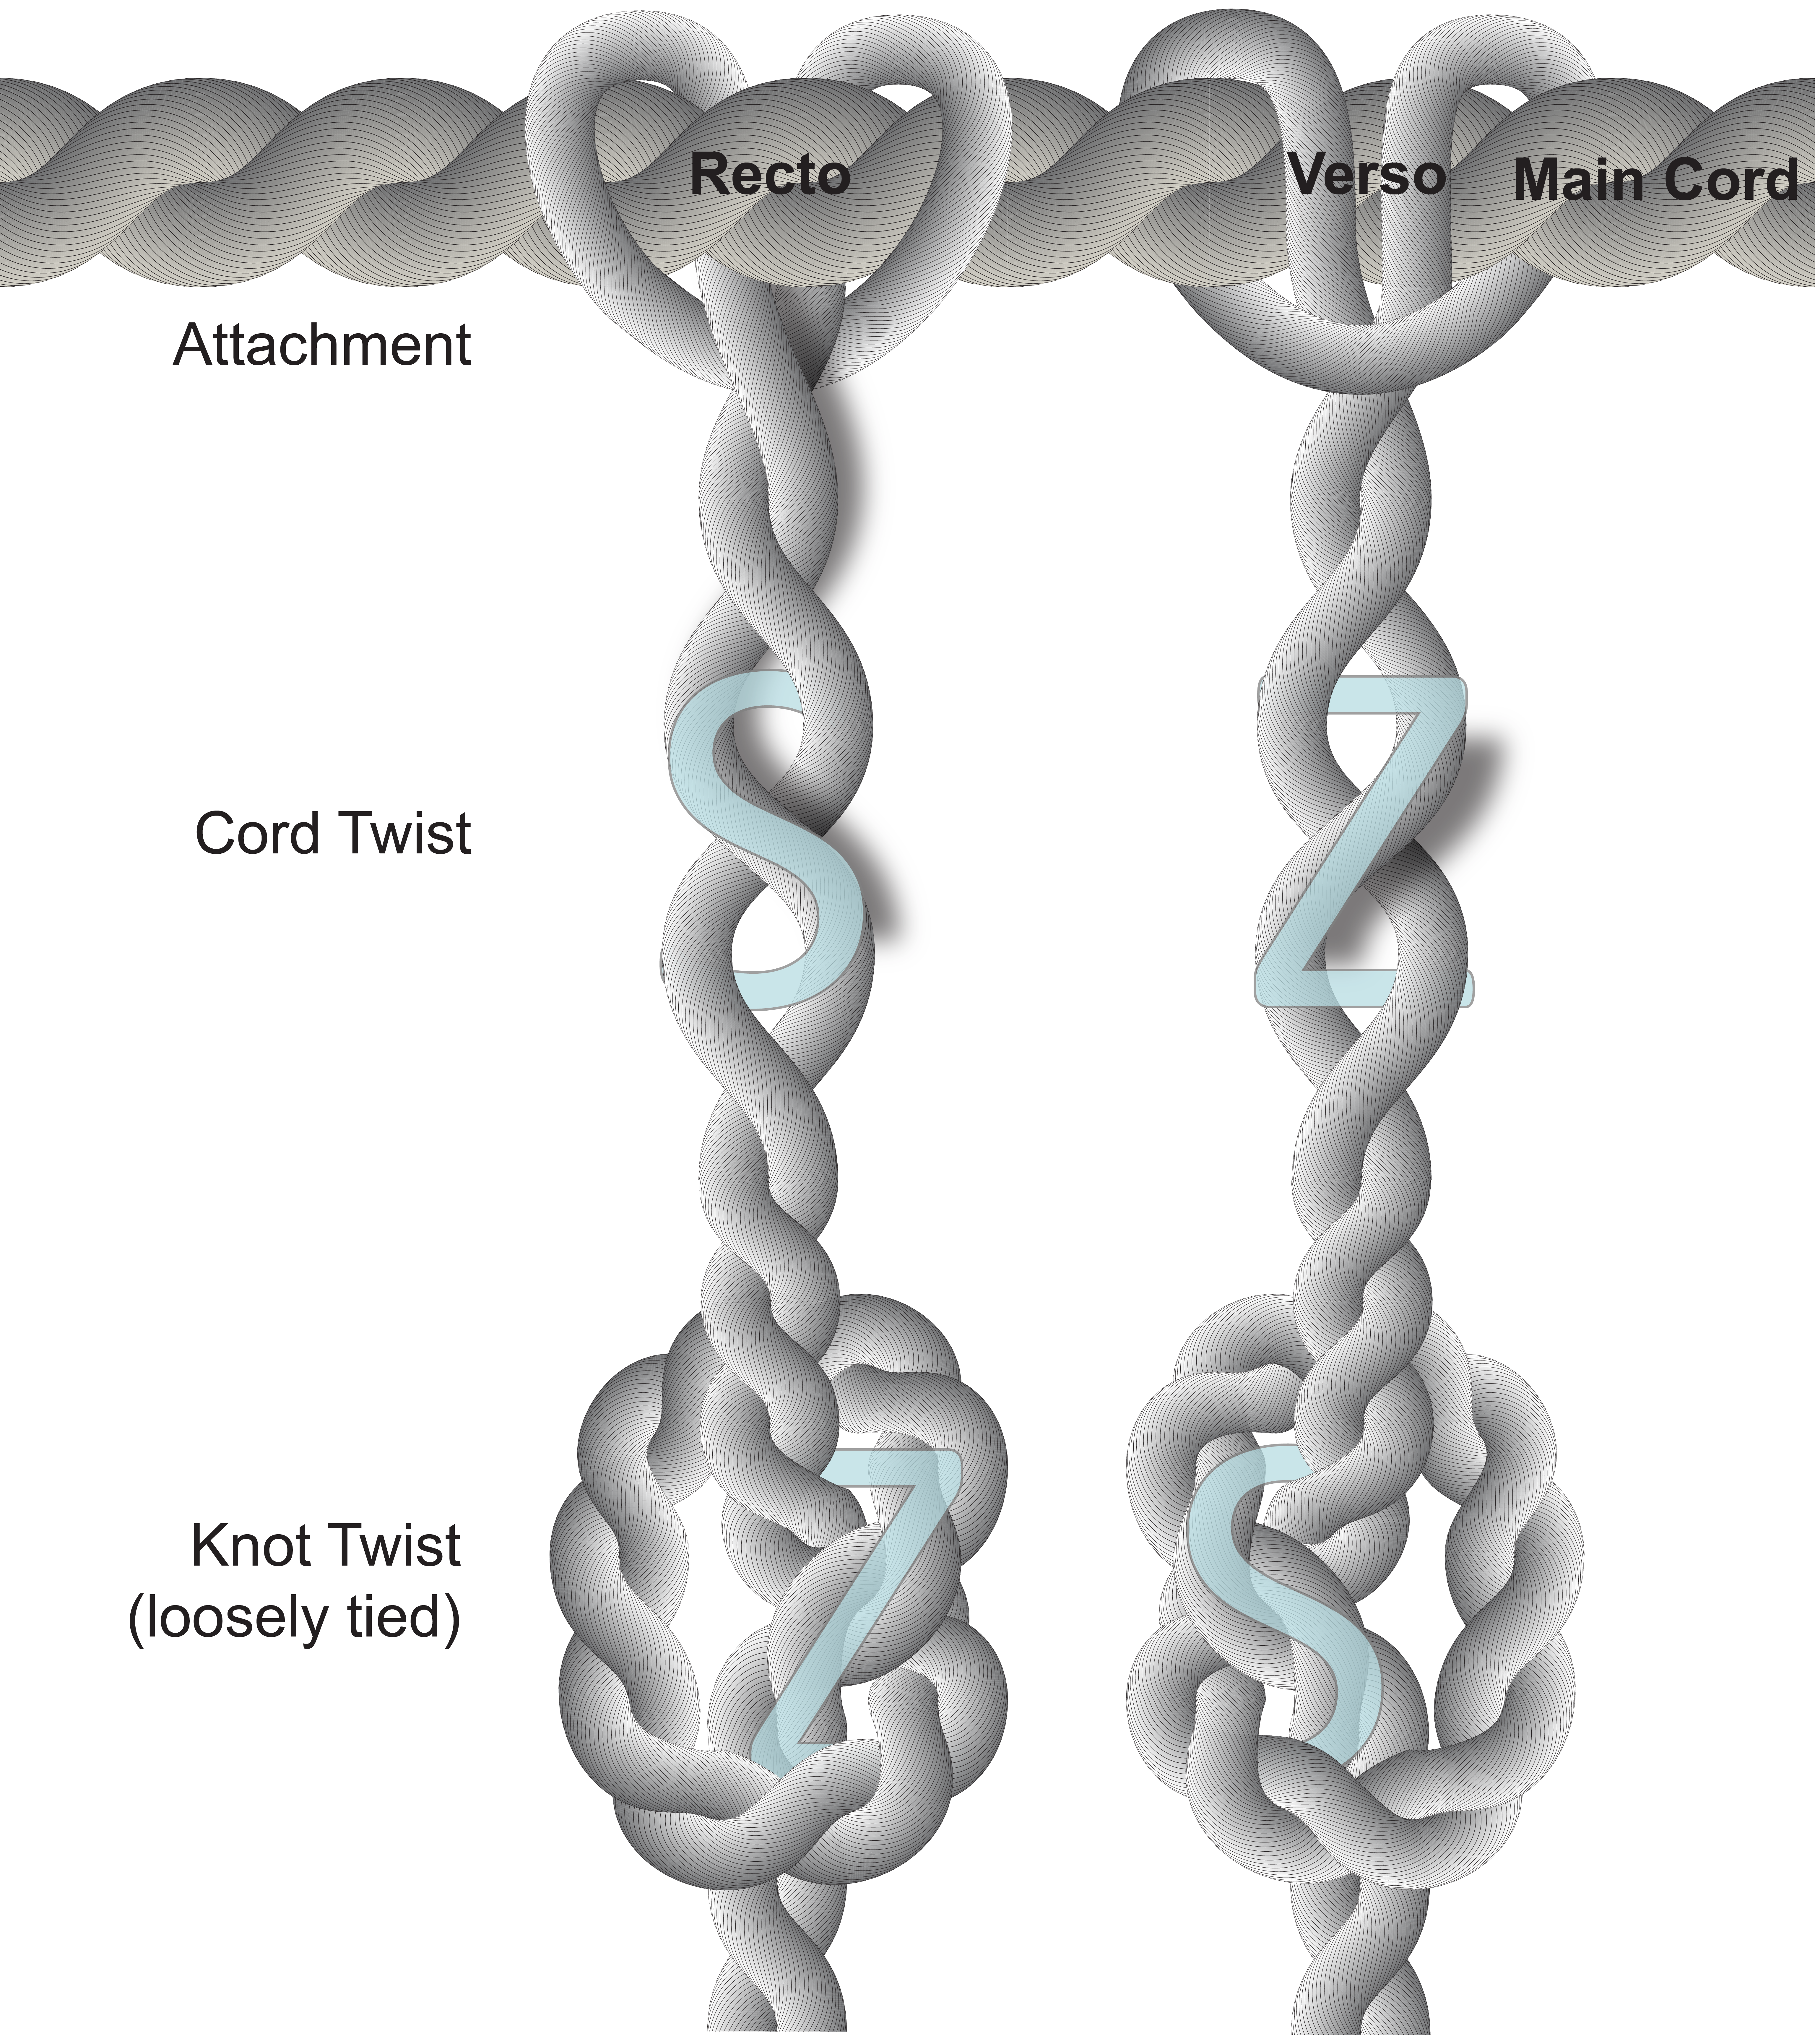 Types of khipu cord attachments, cord twists, and knot twists.